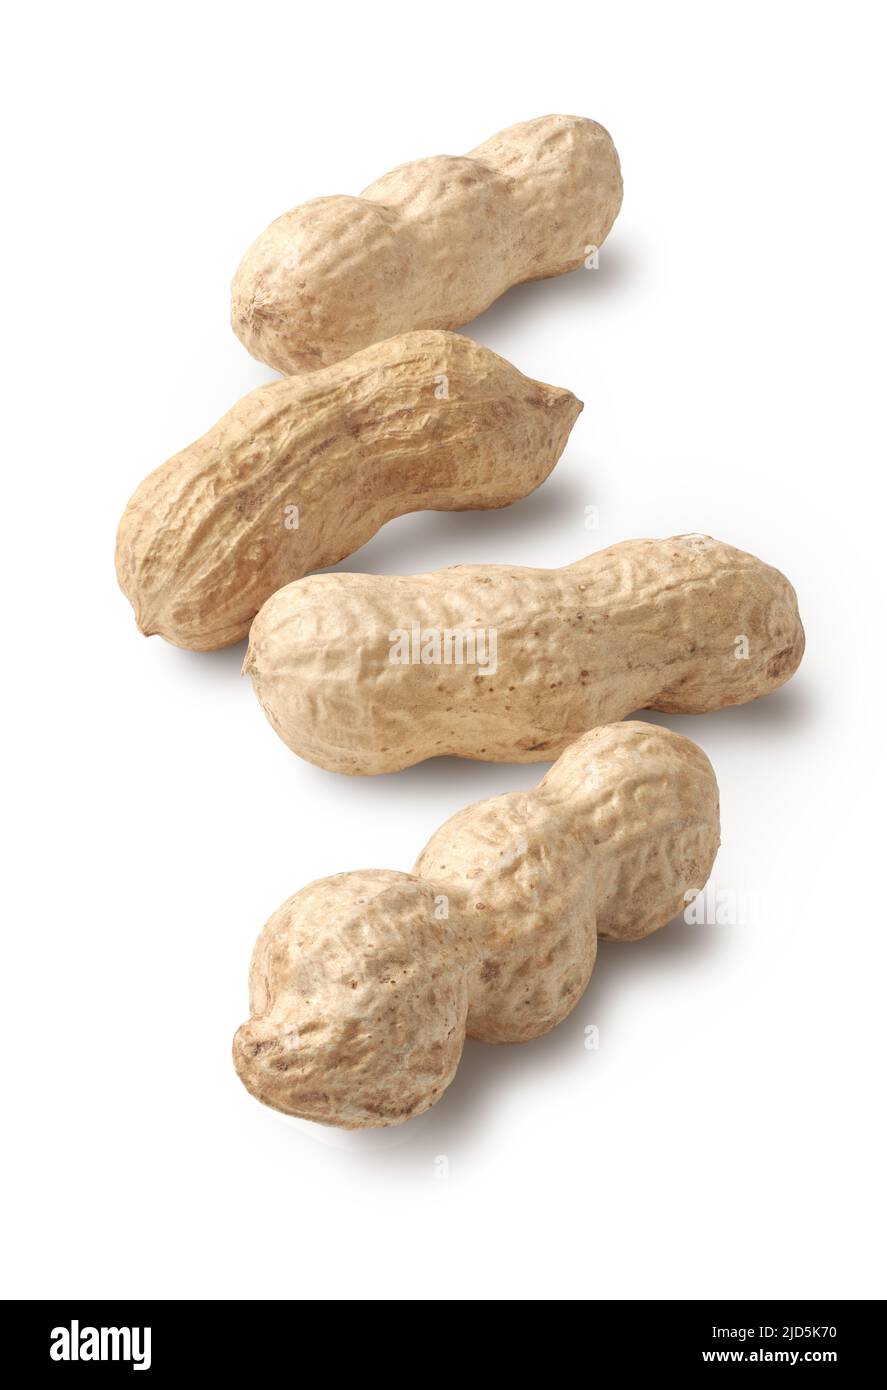 Group of unshelled peanuts, arranged in line, perspective view, isolated on white background Stock Photo